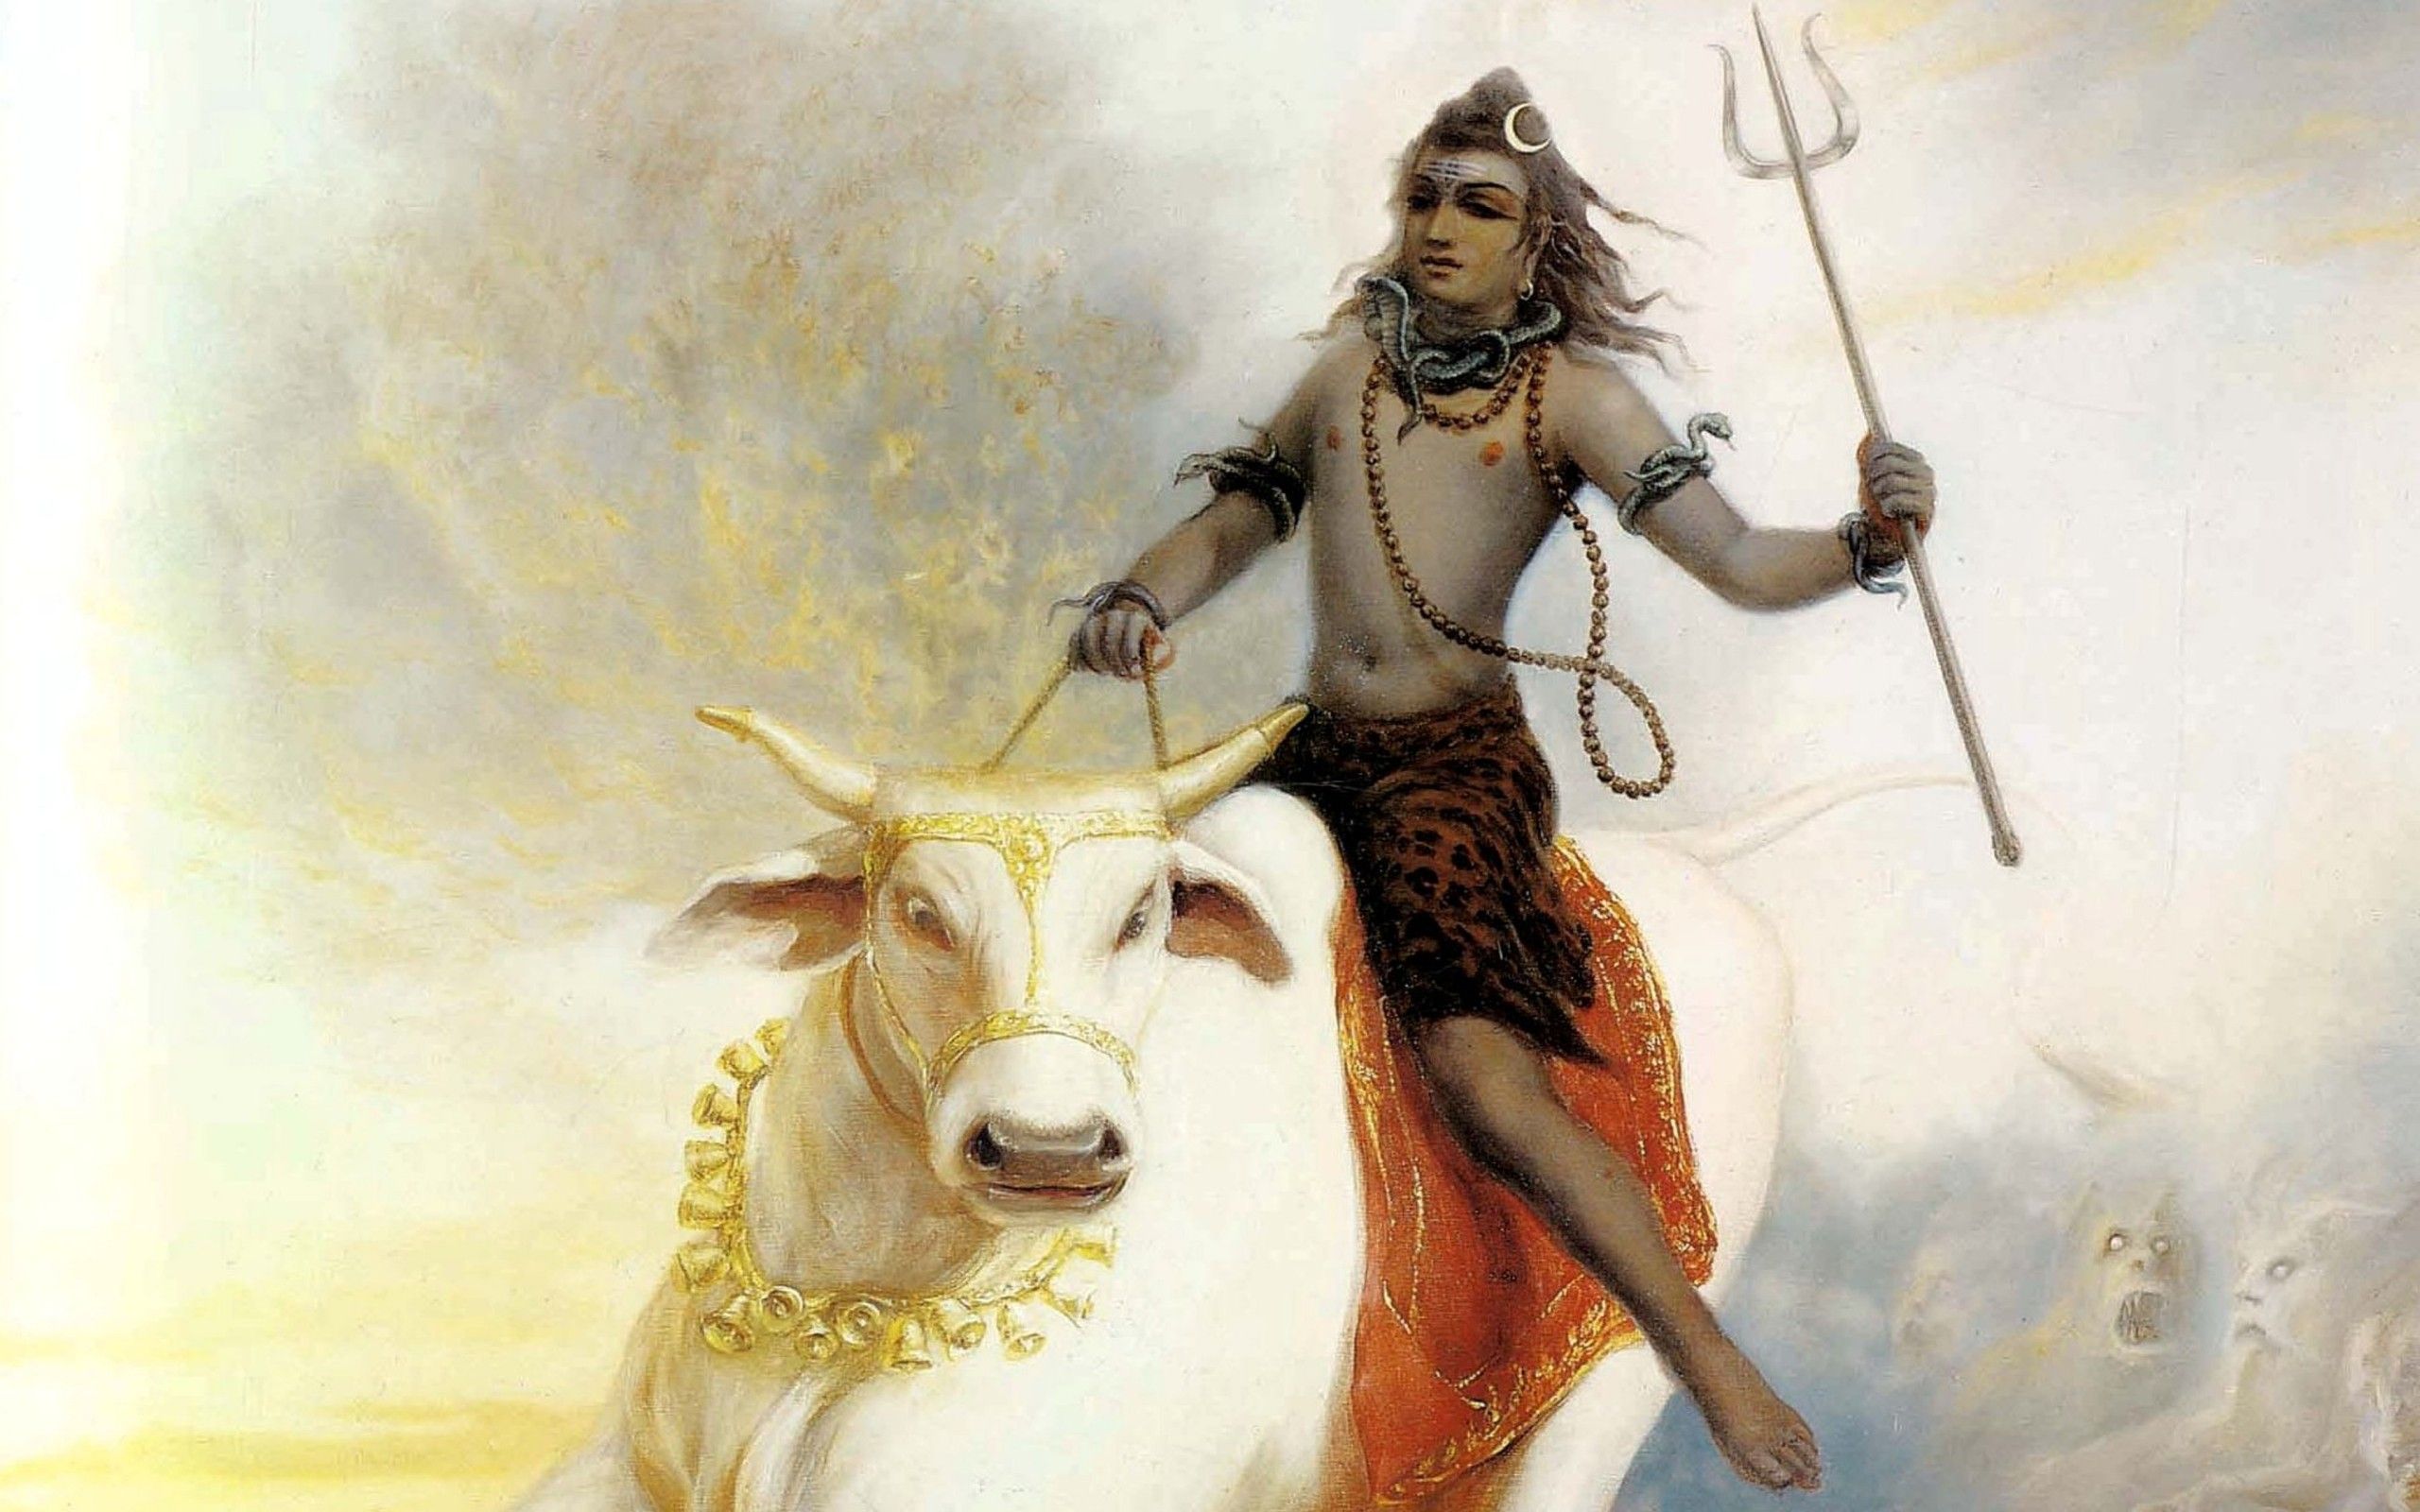 Snakes Ghosts Hinduism Shiva with Nandi - New HD Wallpapers